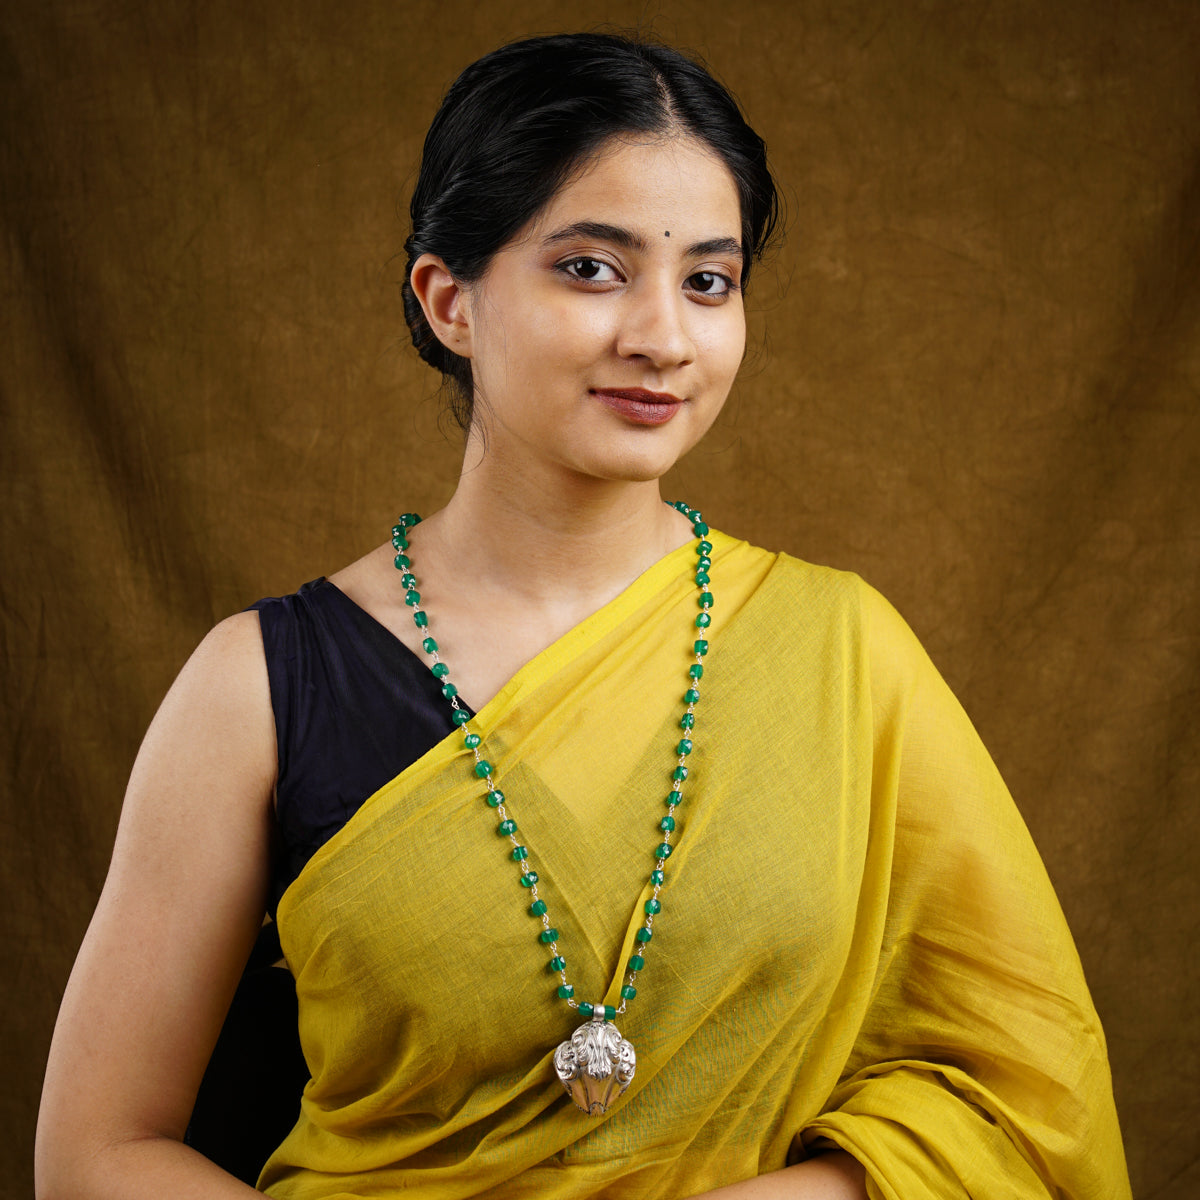 a woman in a yellow sari with a green beaded necklace